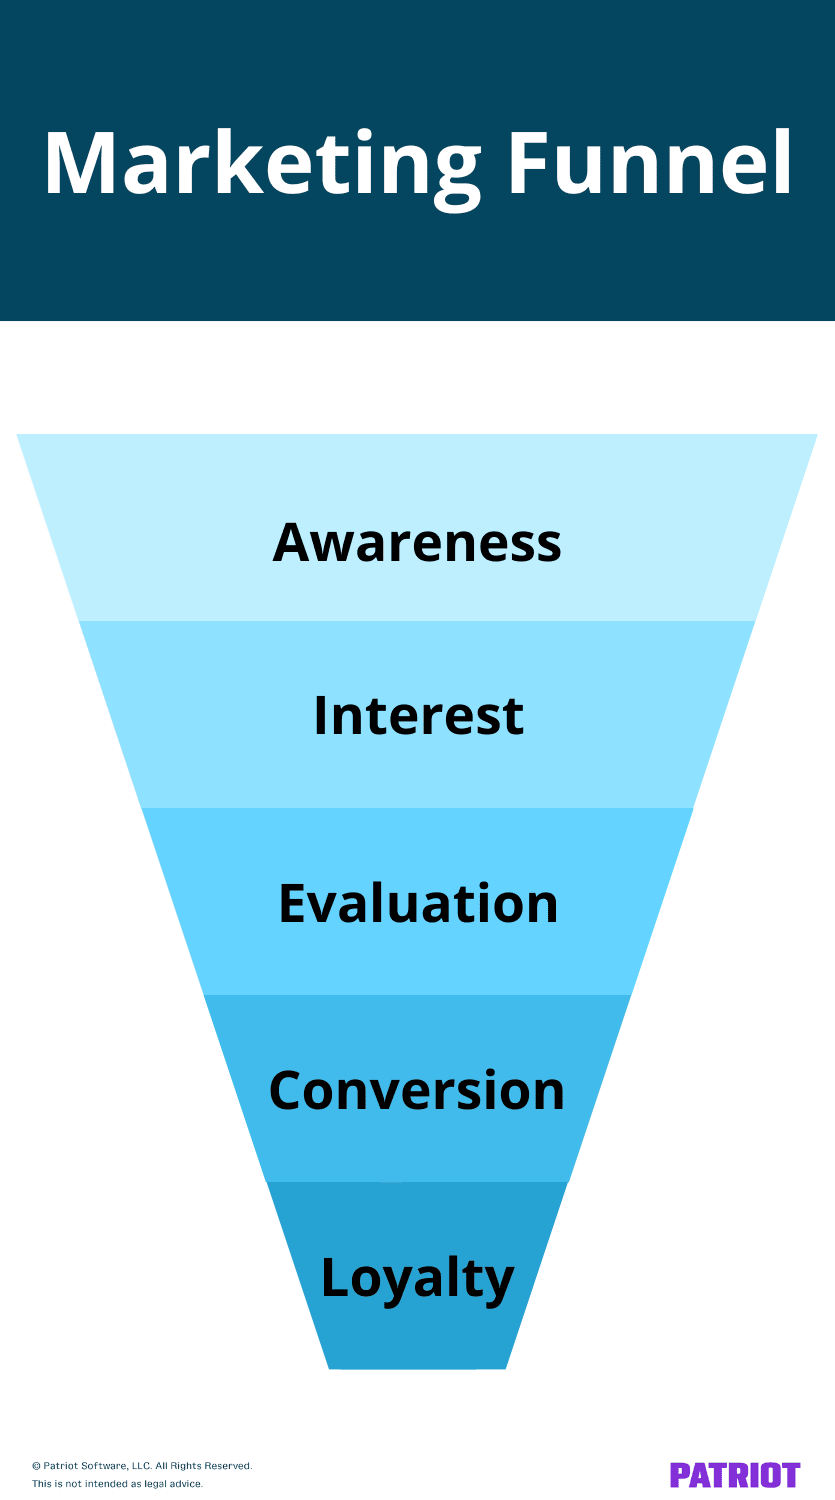 Marketing funnel (from top to bottom): Awareness, interest, evaluation, conversion, loyalty